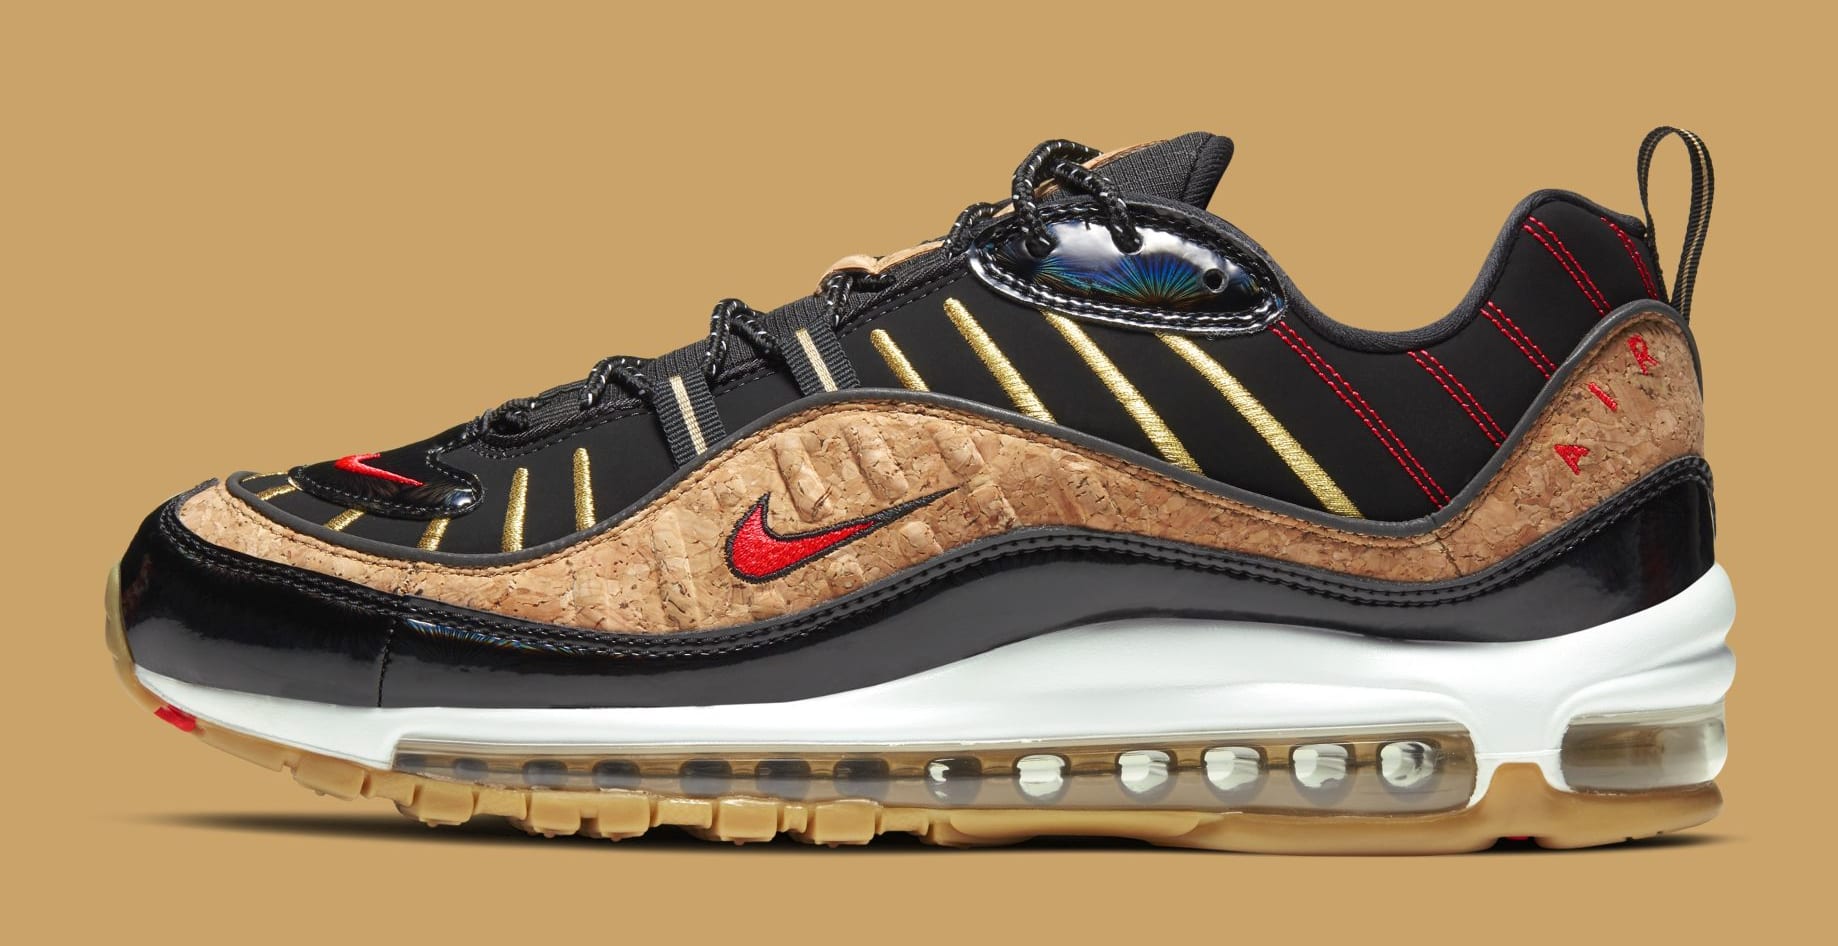 Nike Air Max 98 Coming In Premium "New Year's" Colorway: Official